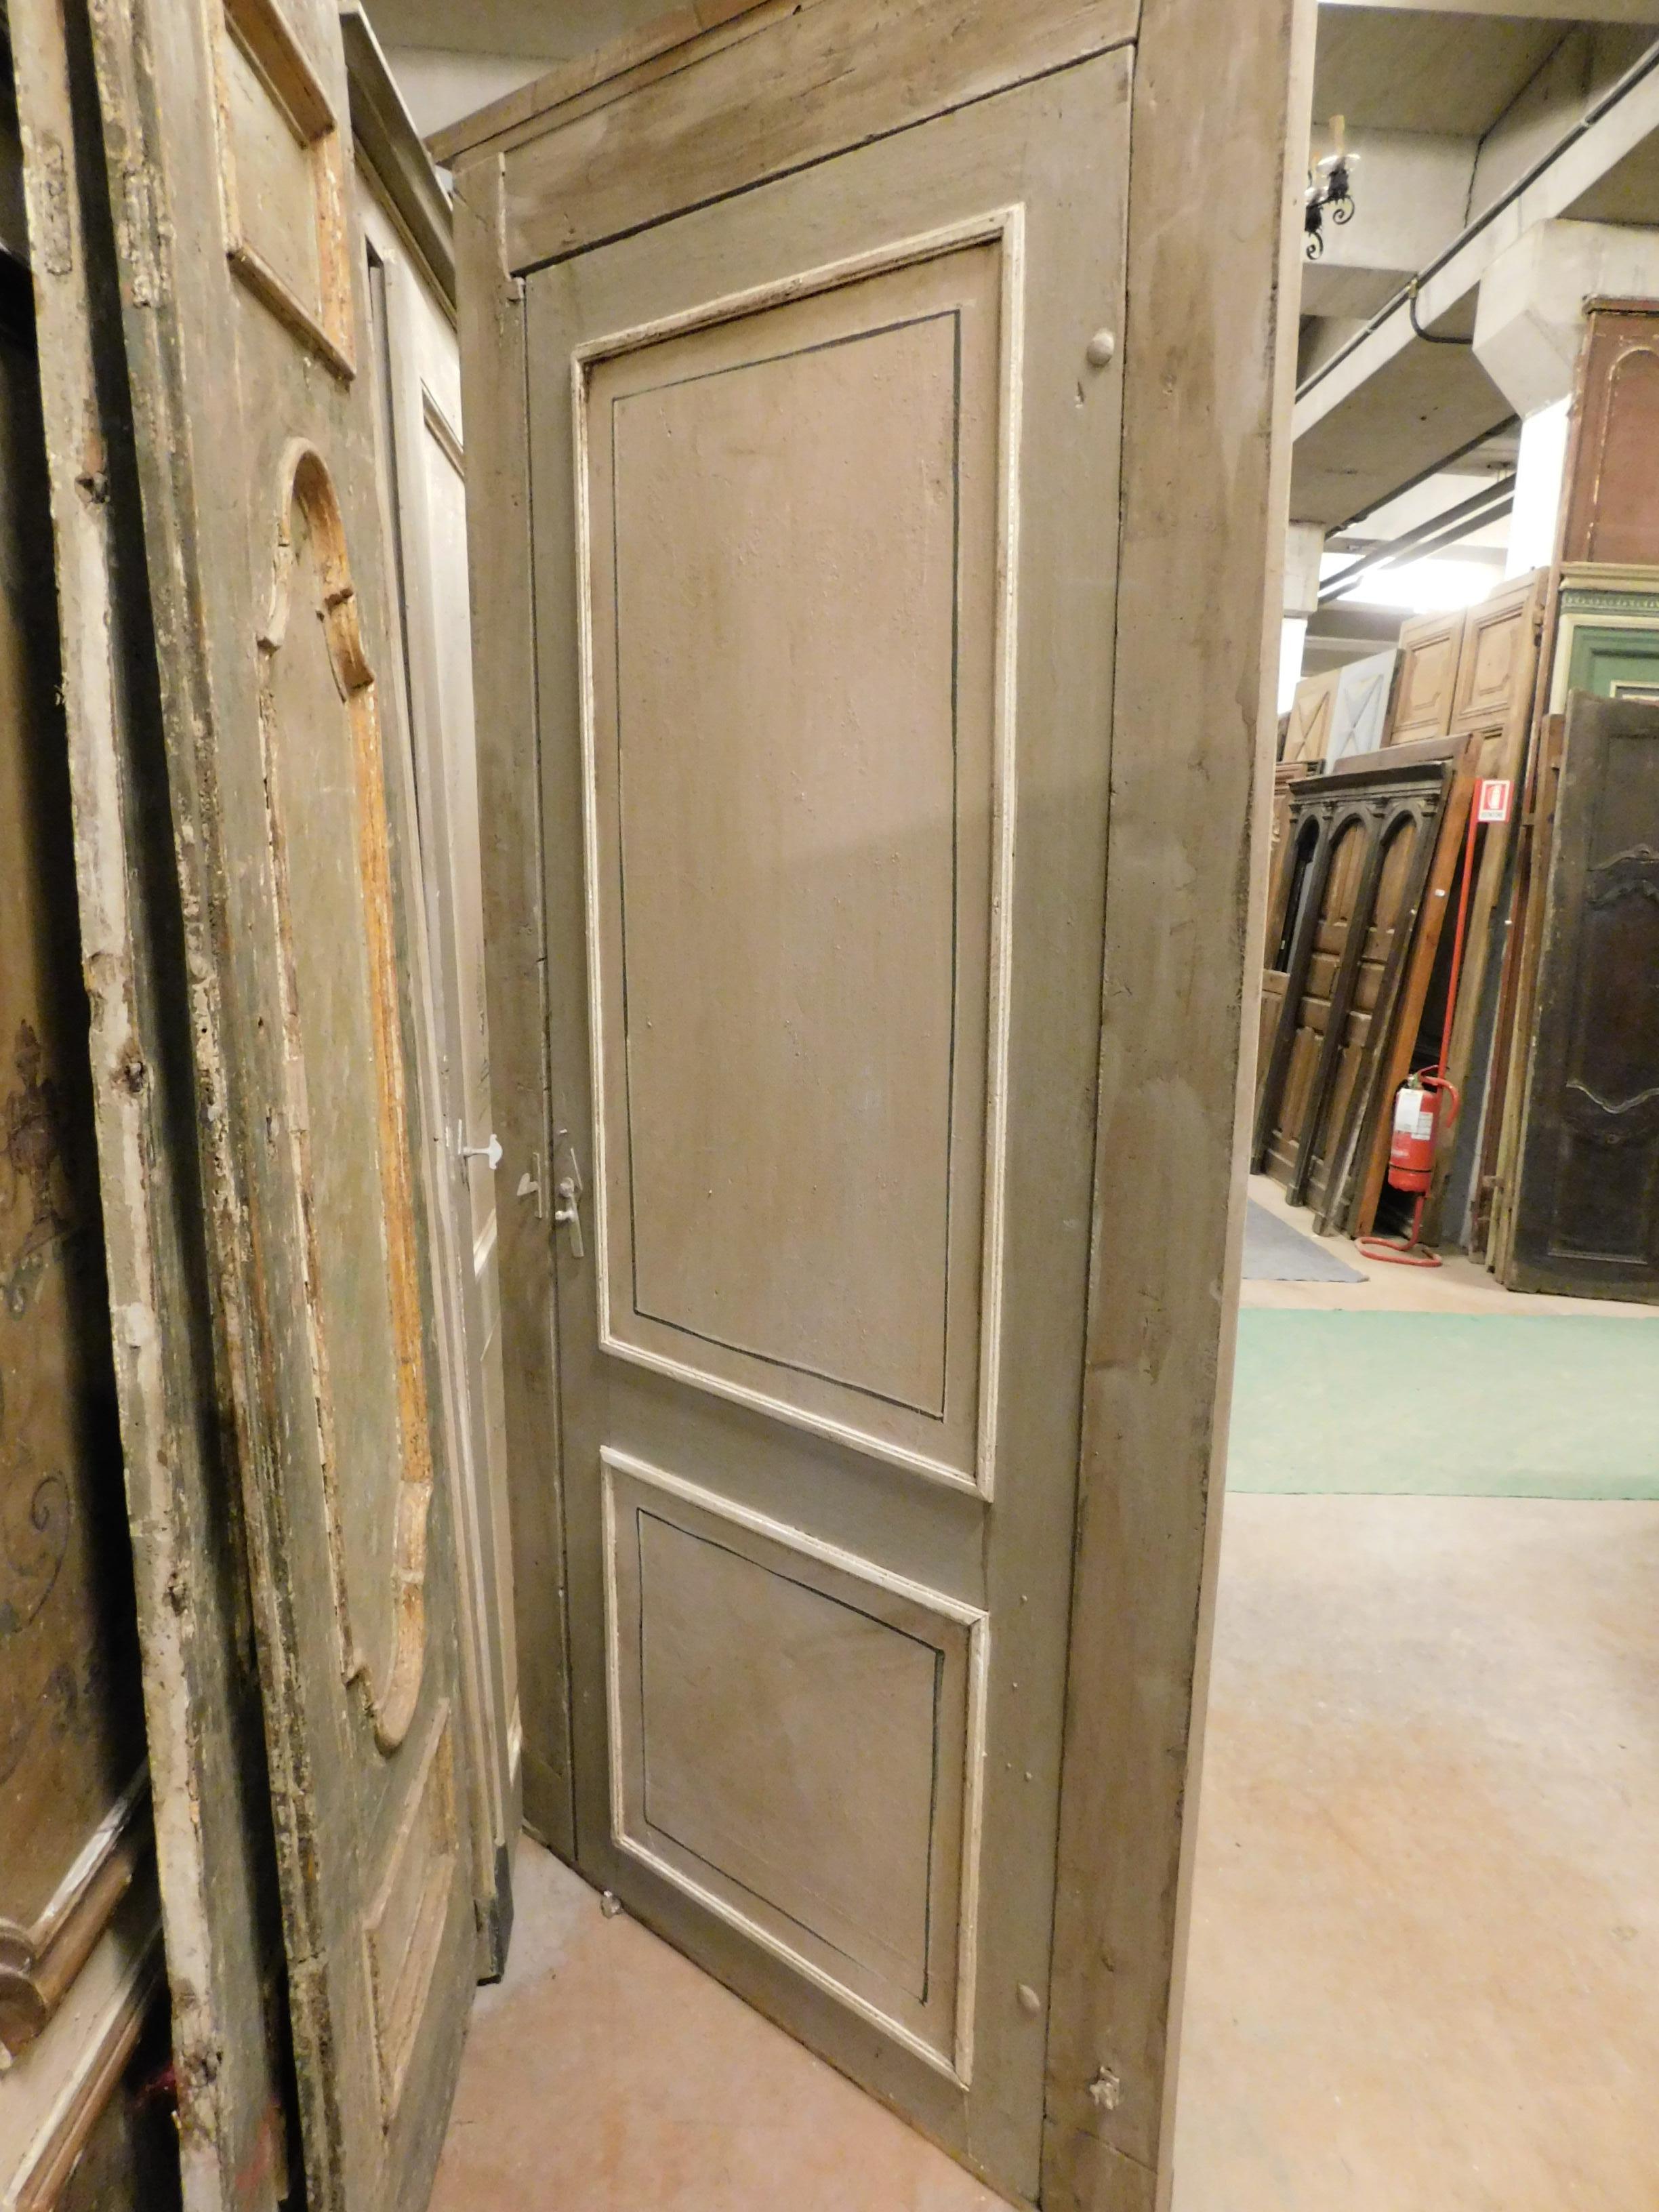 Italian Antique 4 Equal Doors in Lacquered Wood Gray and Beige, Series from Italy, '700